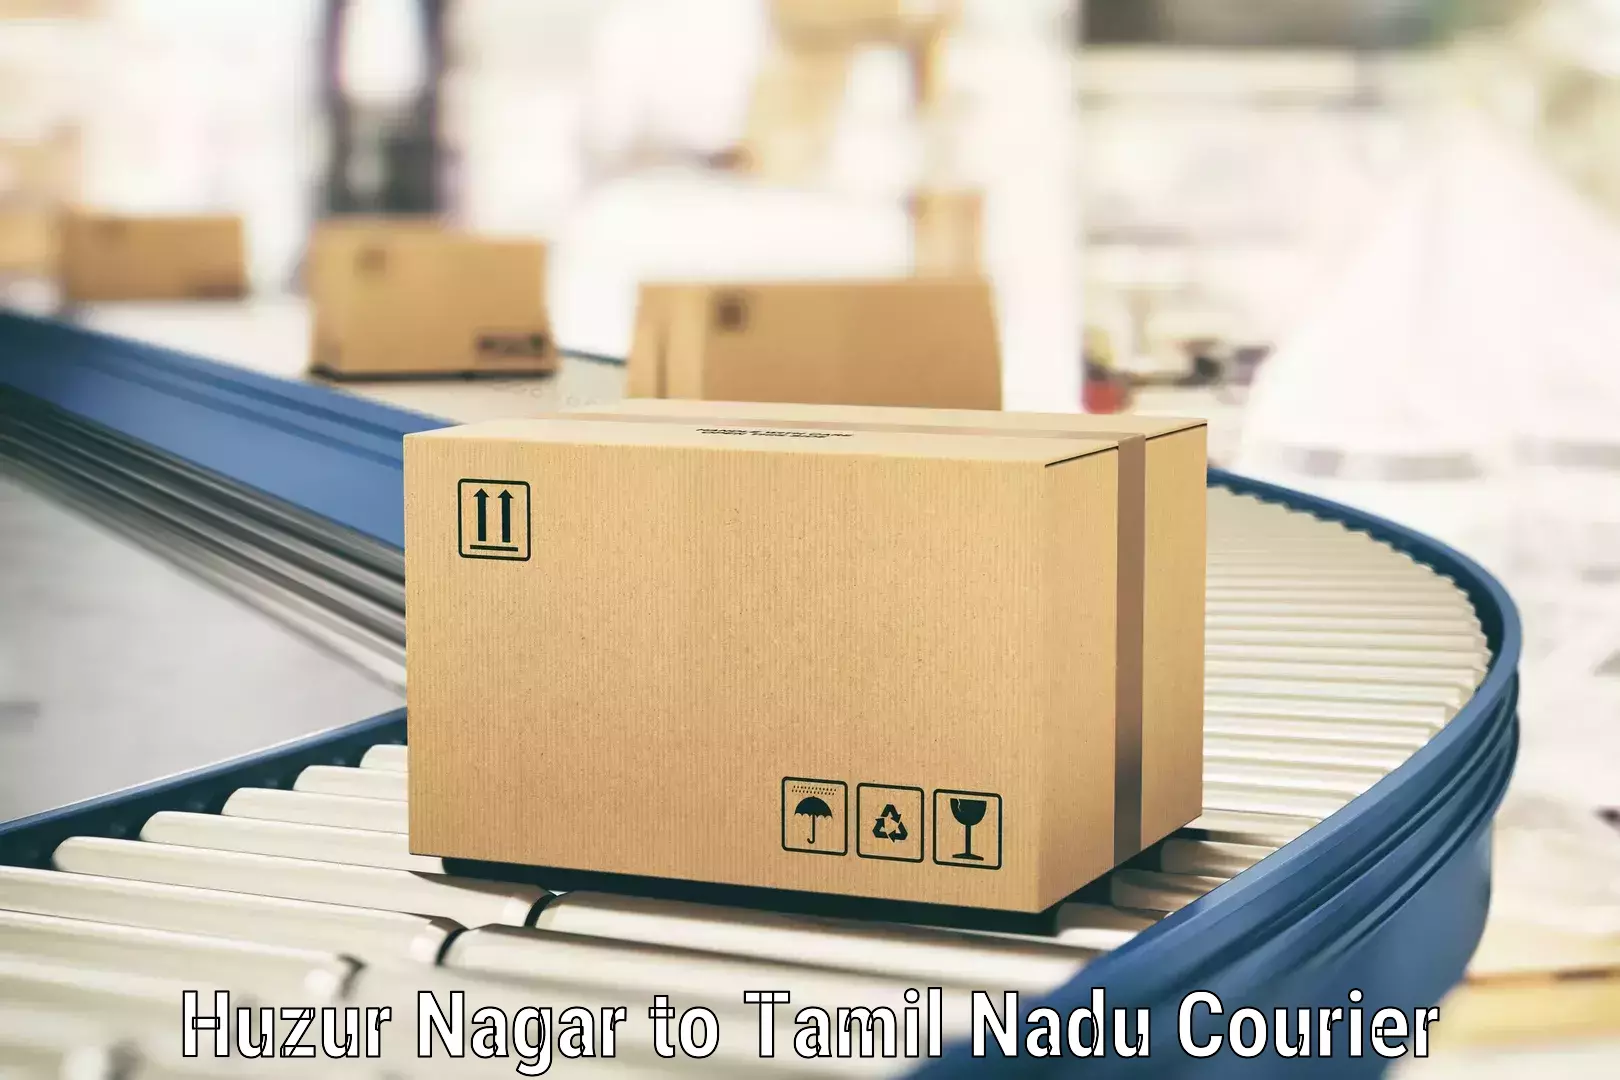 Courier service efficiency in Huzur Nagar to SRM Institute of Science and Technology Chennai